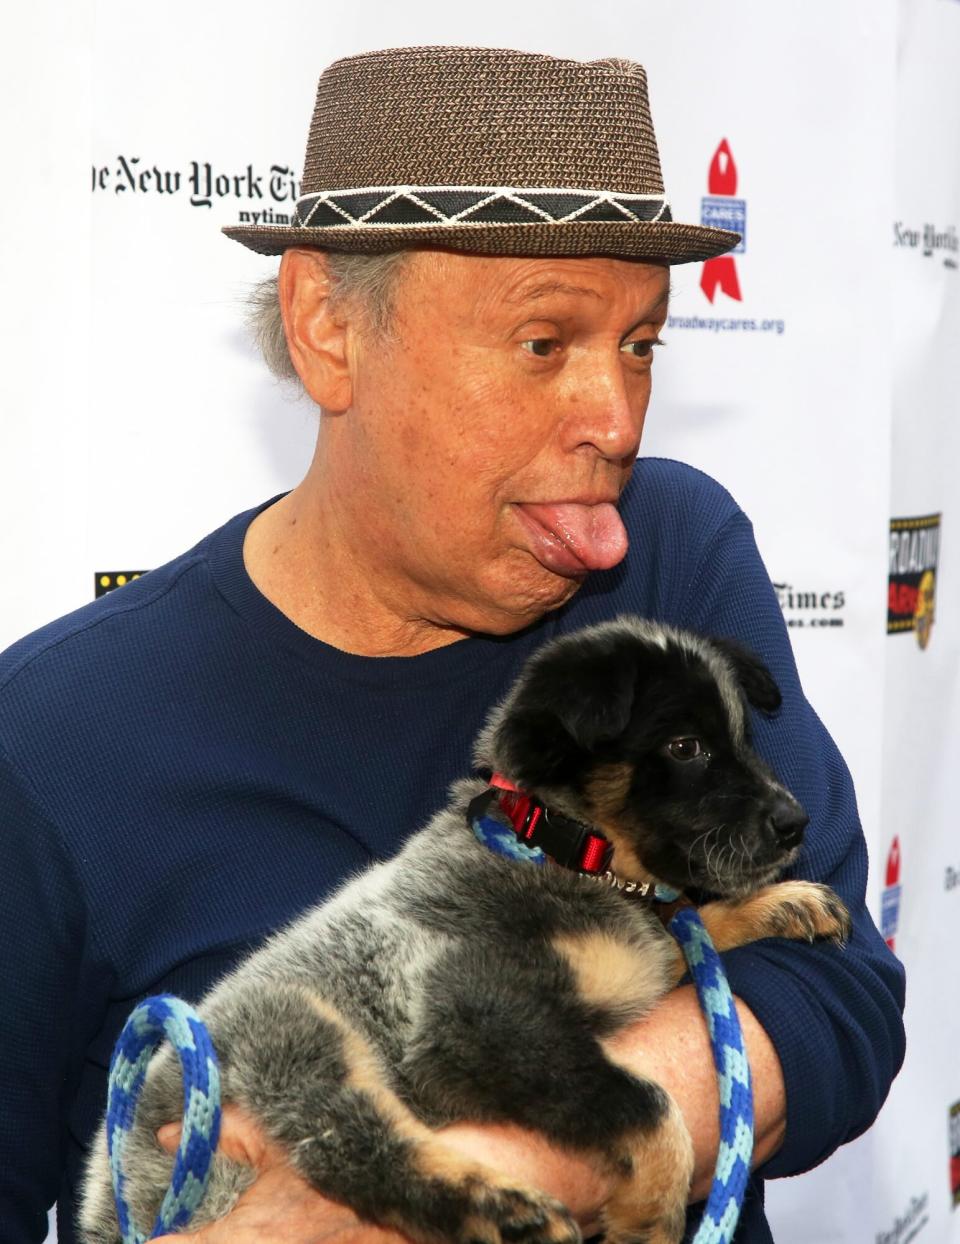 NEW YORK, NEW YORK - JULY 09: Billy Crystal poses at 2022 Broadway Barks at Shubert Alley on July 09, 2022 in New York City. (Photo by Bruce Glikas/WireImage)